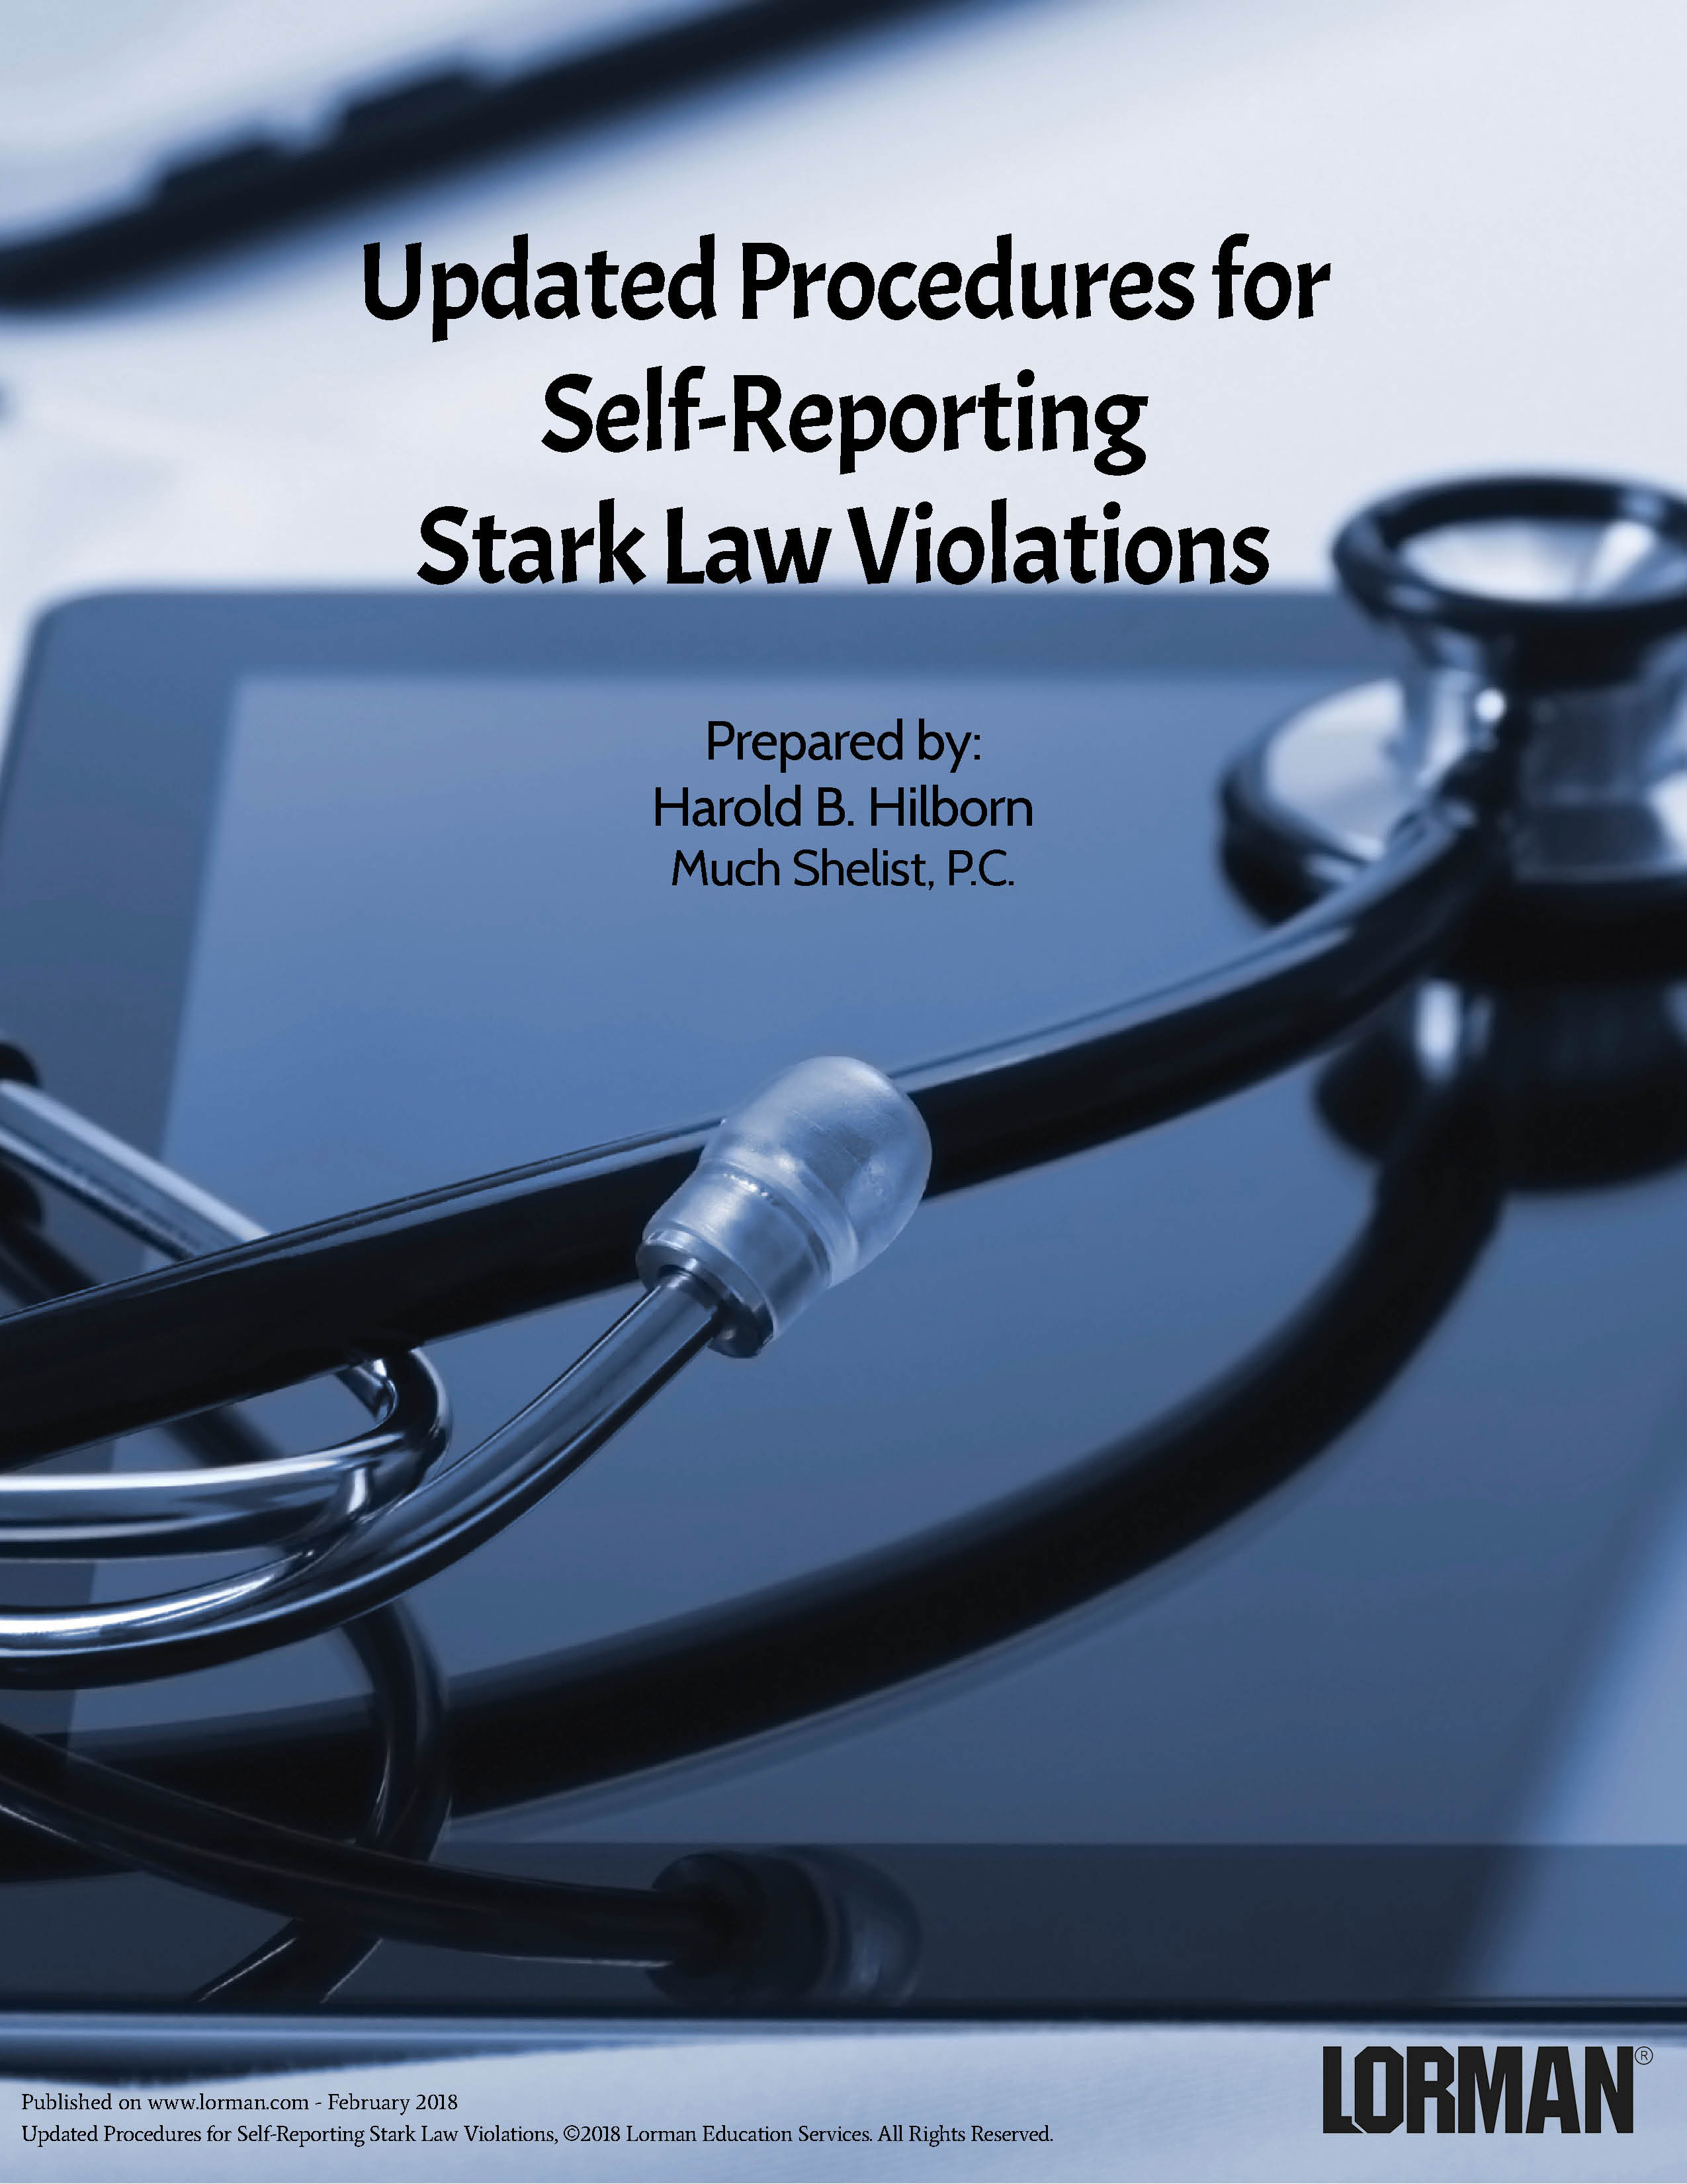 Updated Procedures for Self-Reporting Stark Law Violations